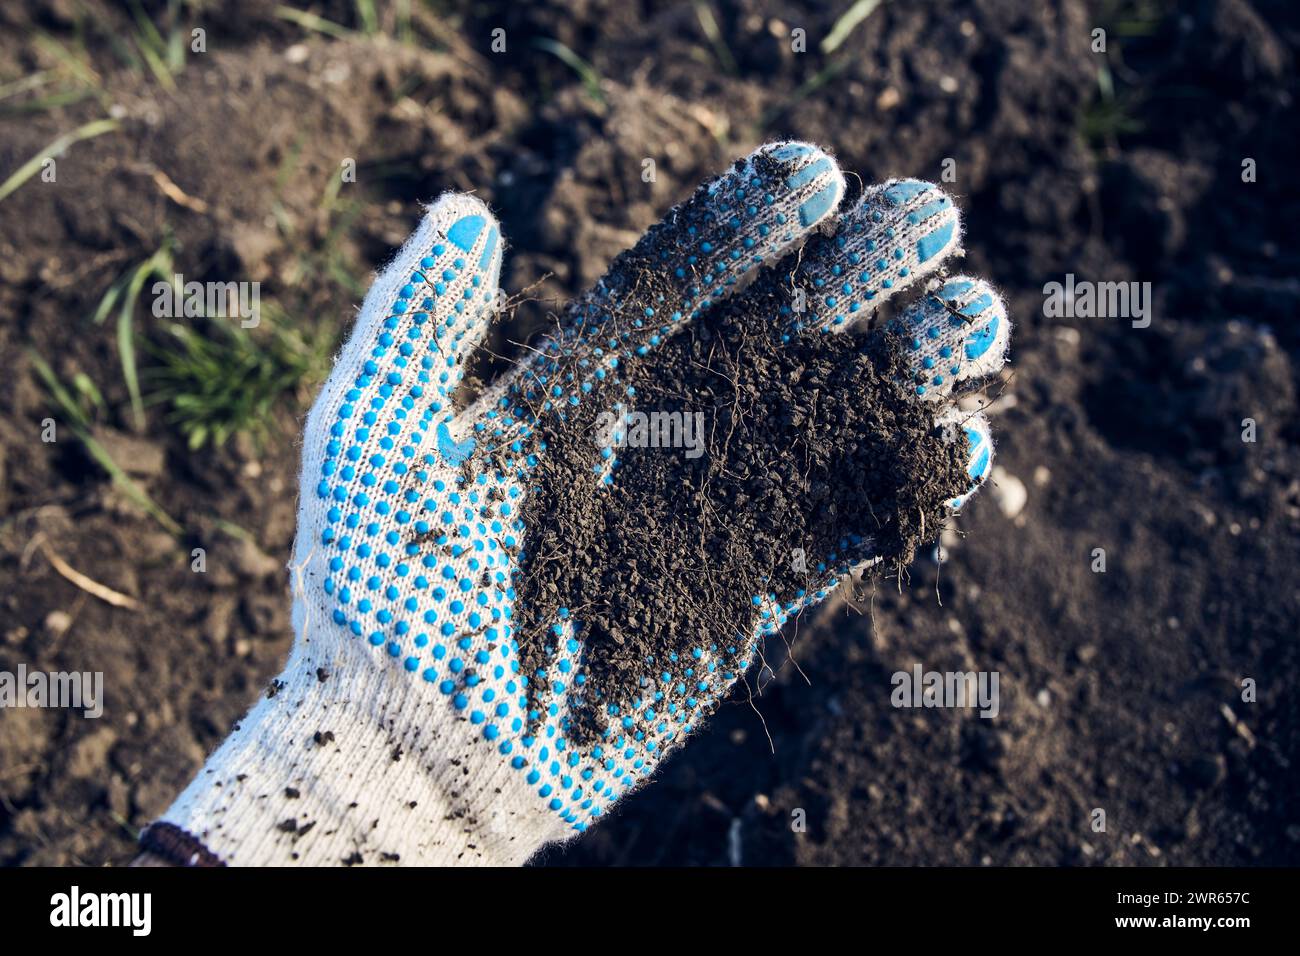 Farmer examining agricultural field soil sample from the palm of his hand, pov image Stock Photo